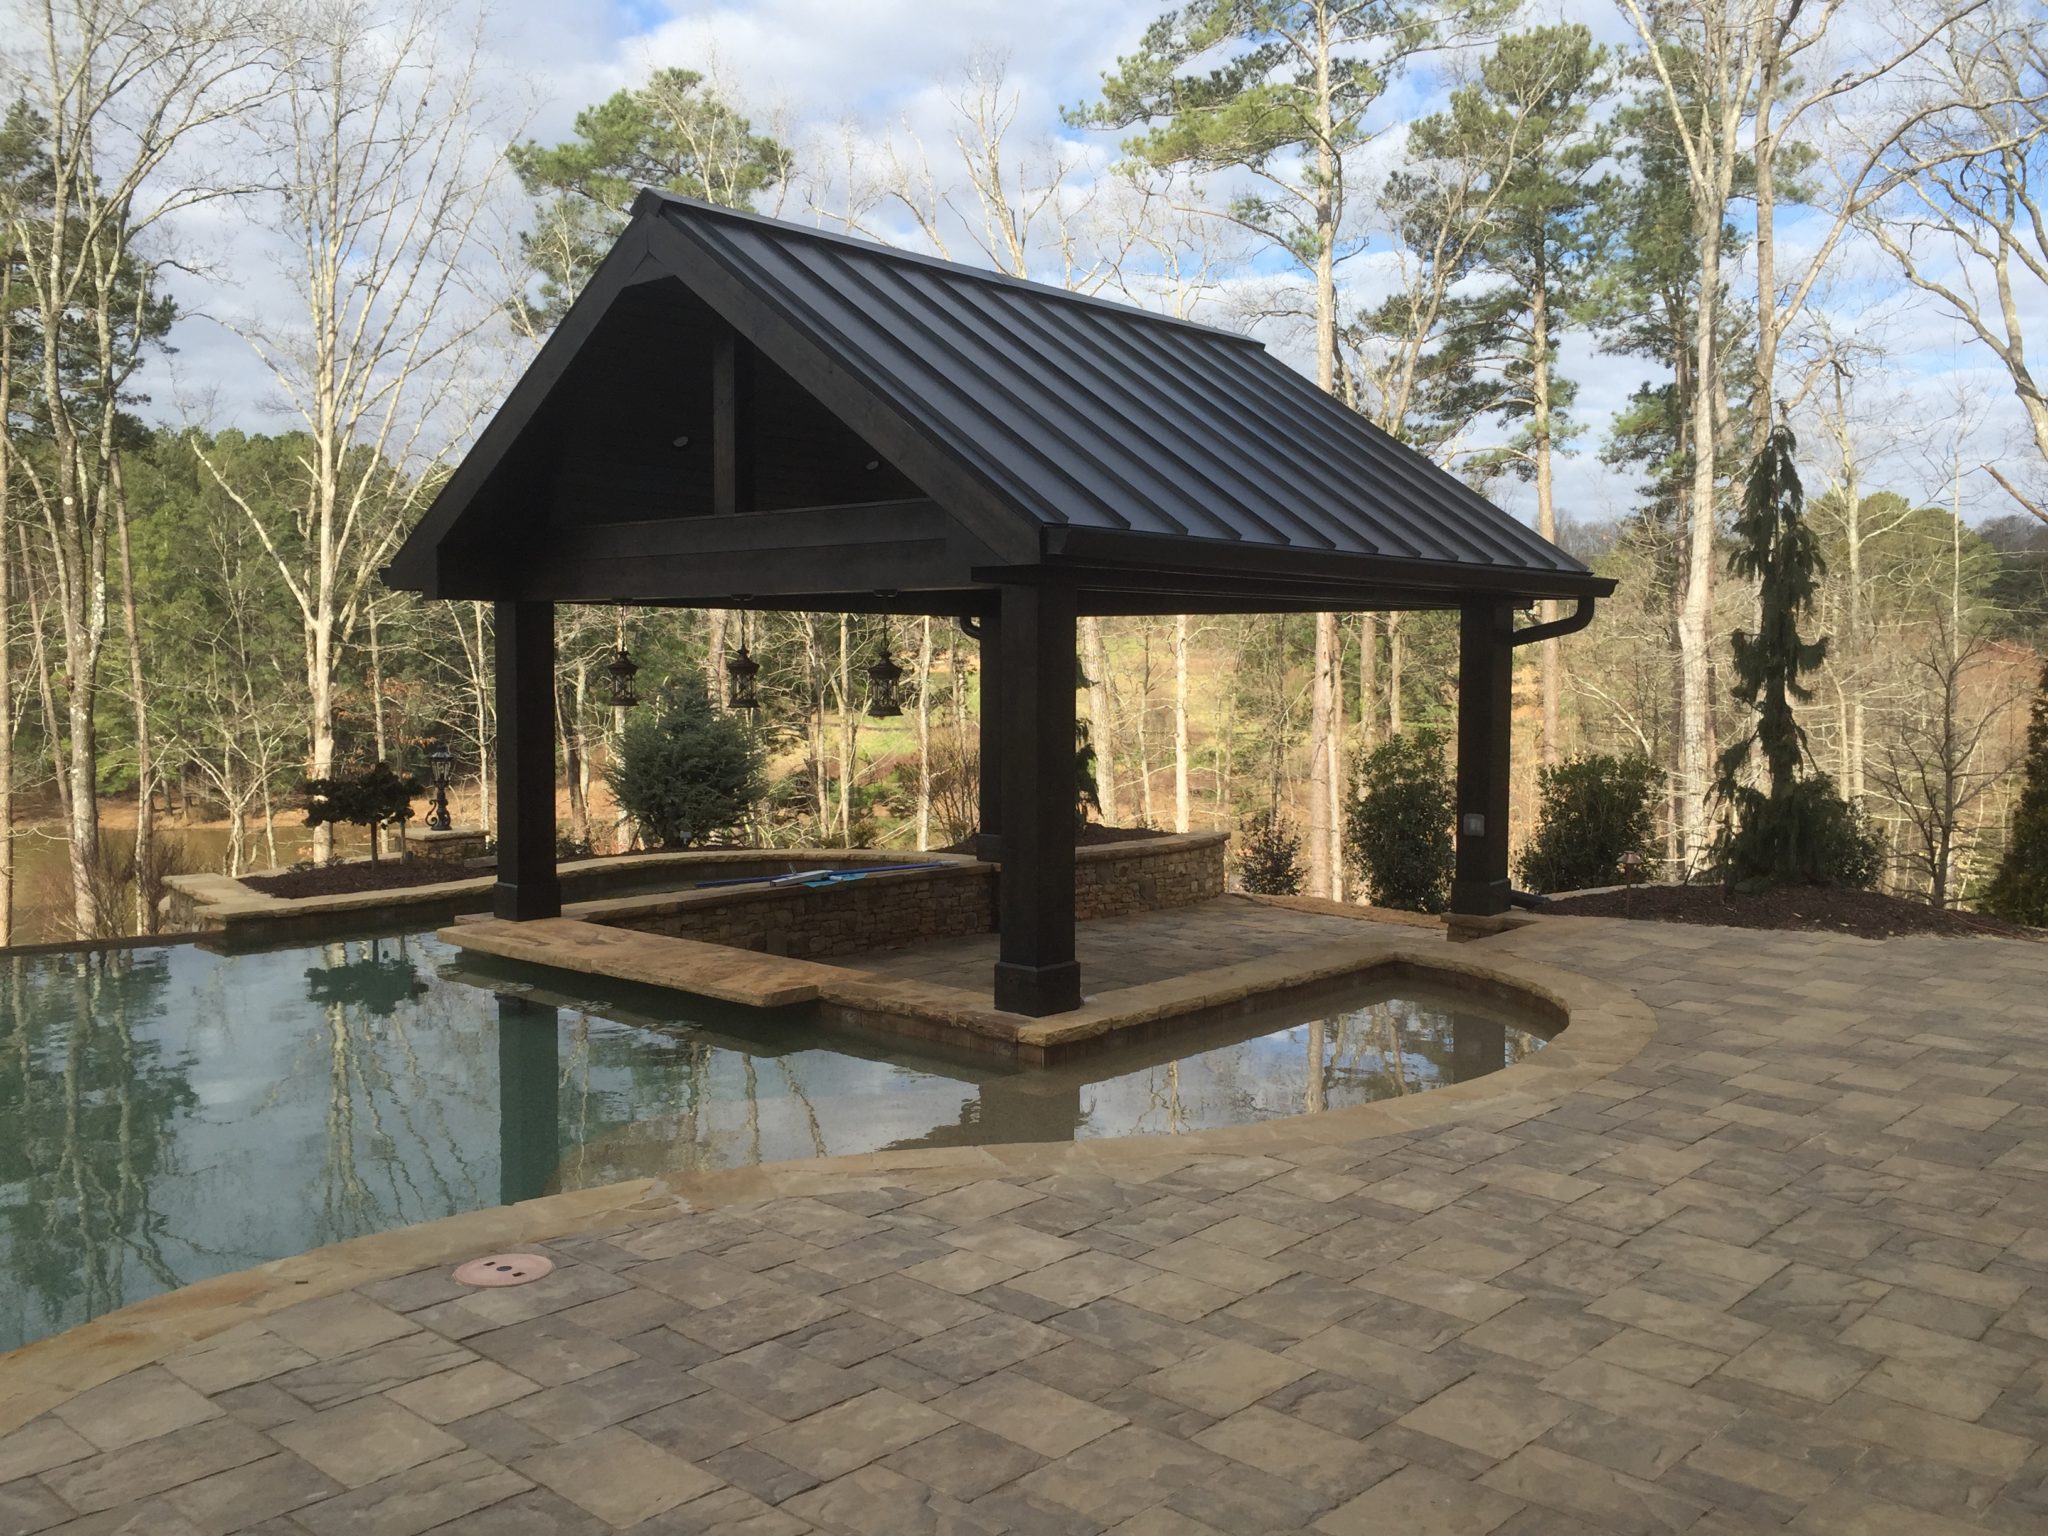 Outdoor Living, Outdoor Kitchen, Pool Cabana Designed and Built by Georgia Classic Pool